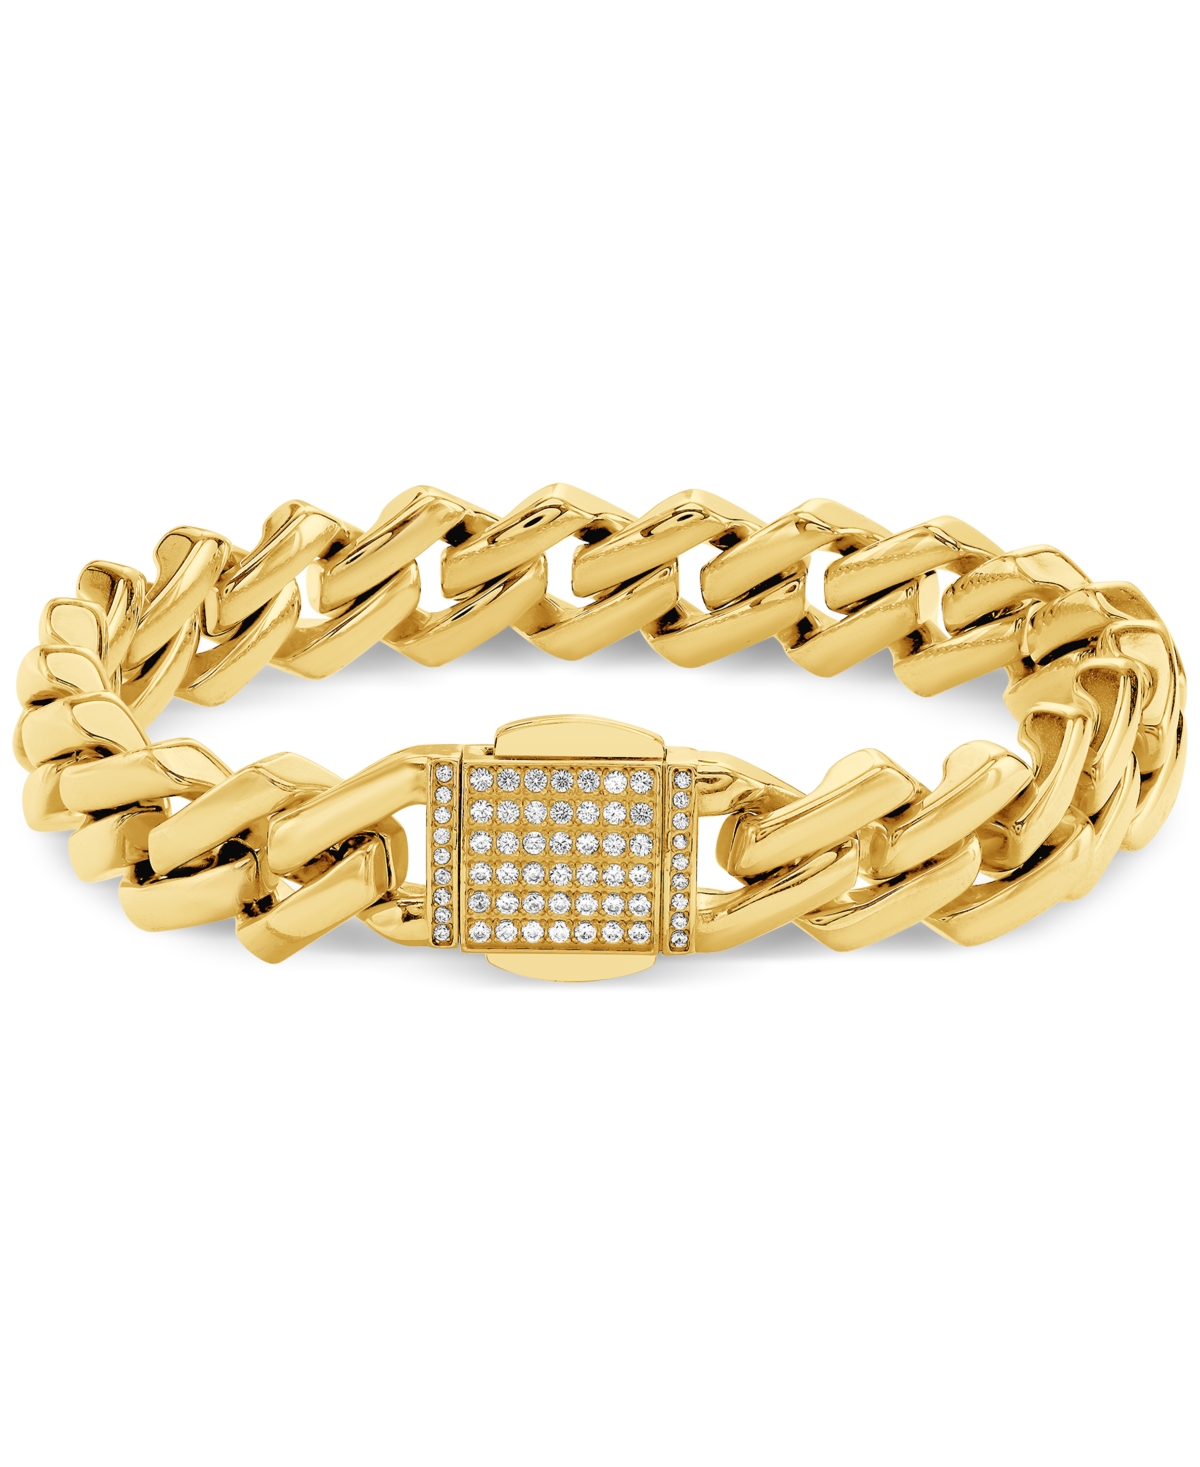 Men's Cubic Zirconia-Accented Curb Link Chain Bracelet in Gold-Tone Ion-Plated Stainless Steel - Gold-Tone